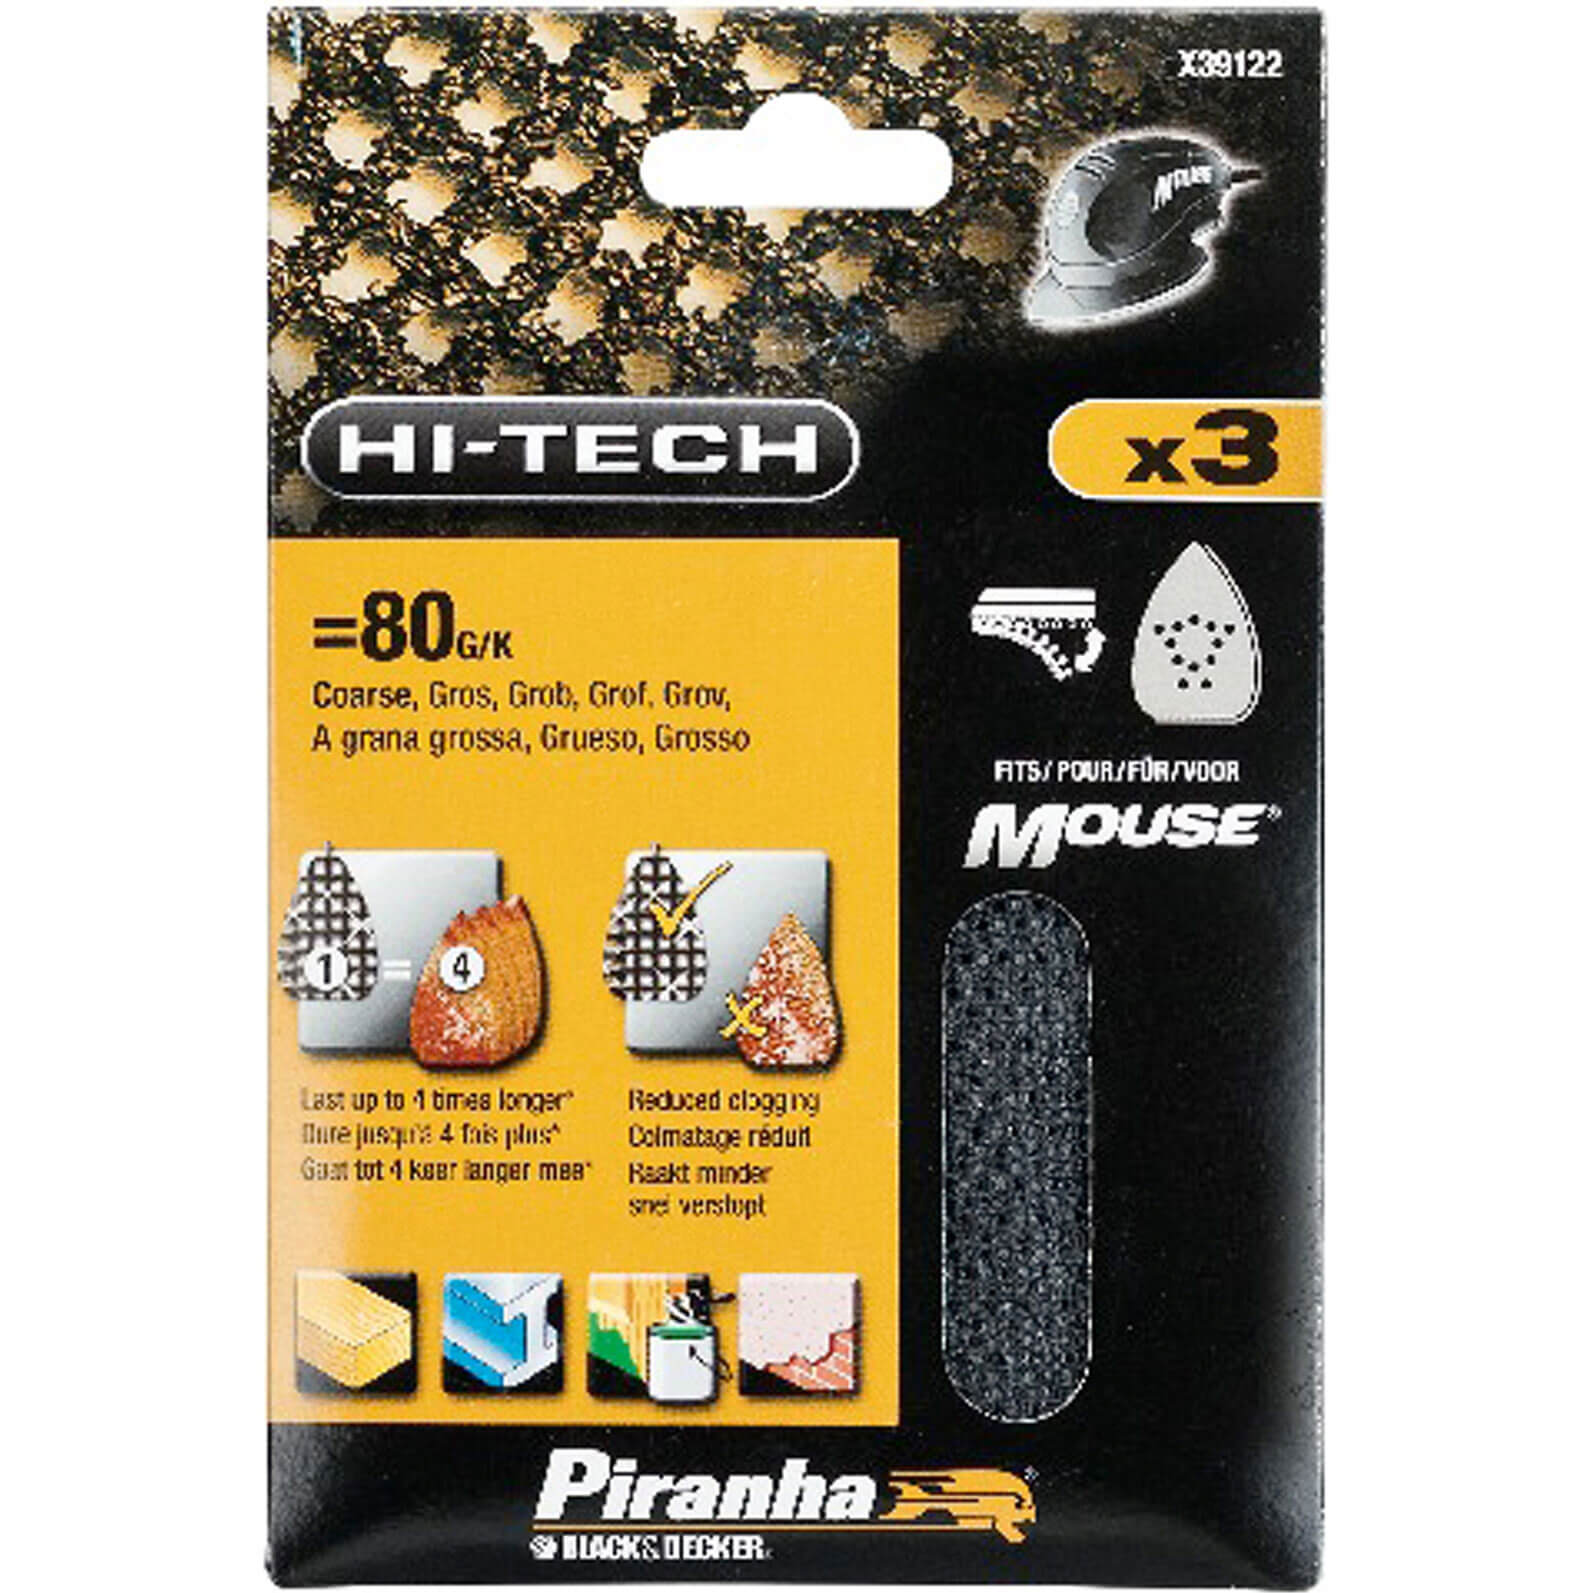 Black and Decker Piranha Hi Tech Quick Fit Mesh Mouse Sanding Sheets 80g Pack of 3